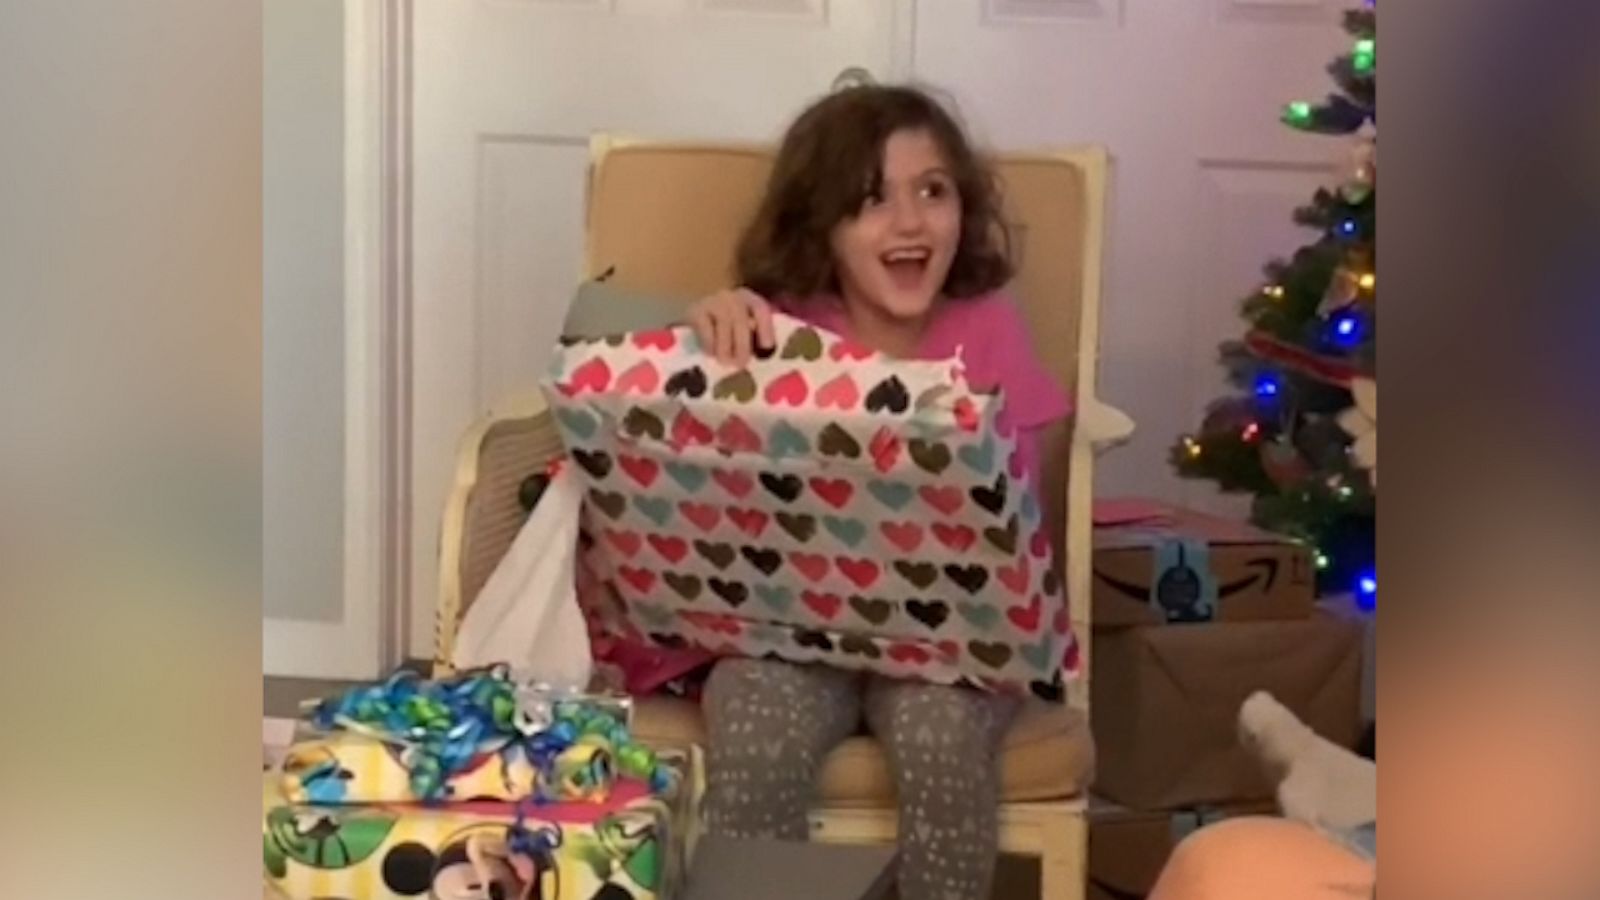 Little girl's gift inspires toy giant to consider a same-sex wedding set - Good Morning America